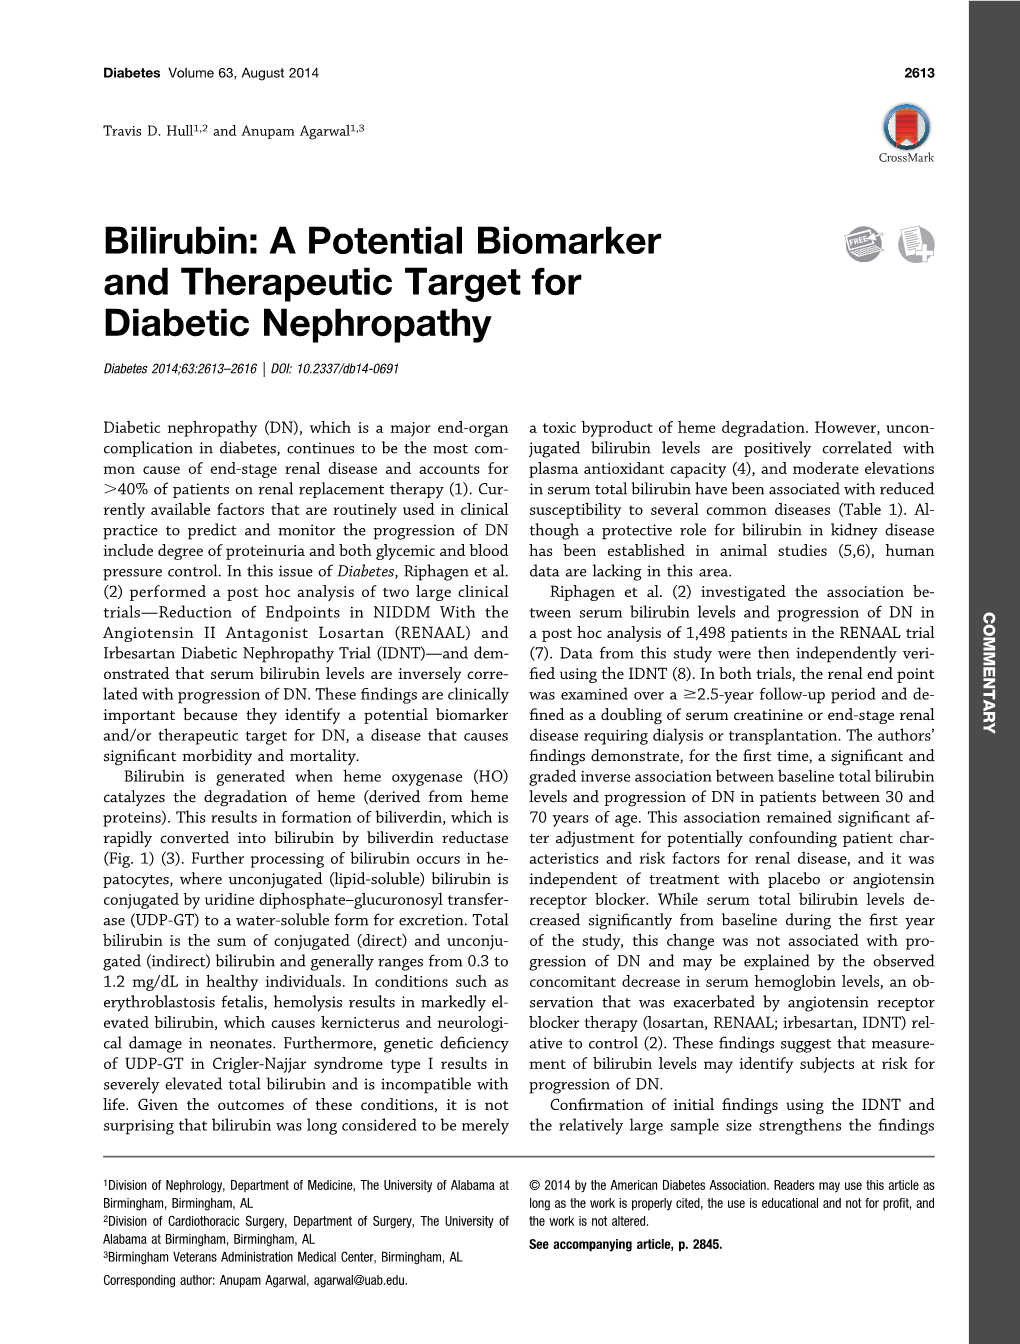 Bilirubin: a Potential Biomarker and Therapeutic Target for Diabetic Nephropathy